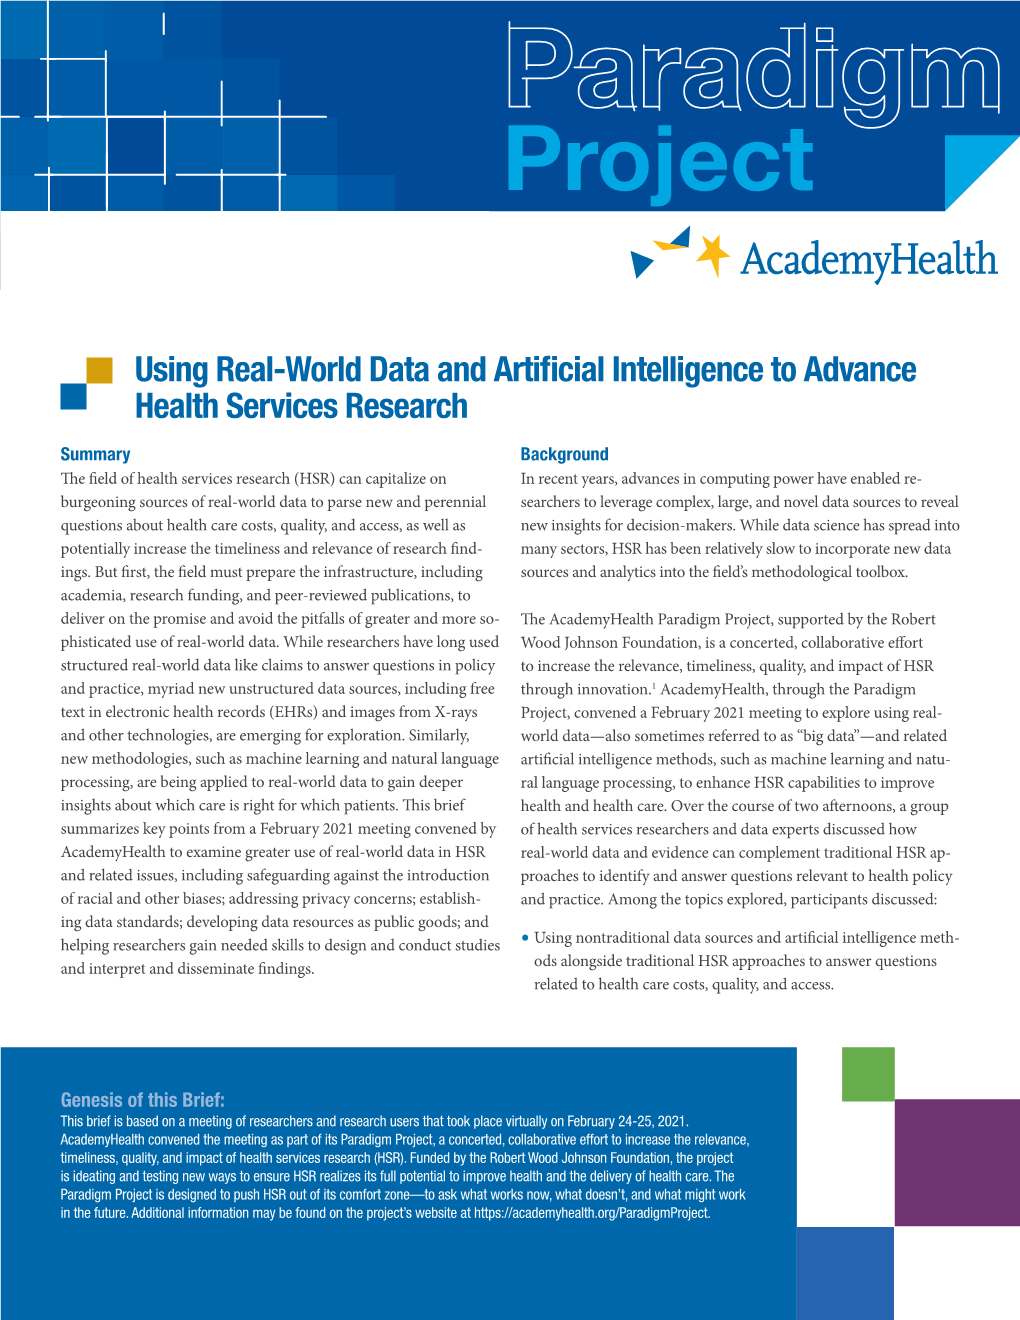 Using Real-World Data and Artificial Intelligence to Advance Health Services Research